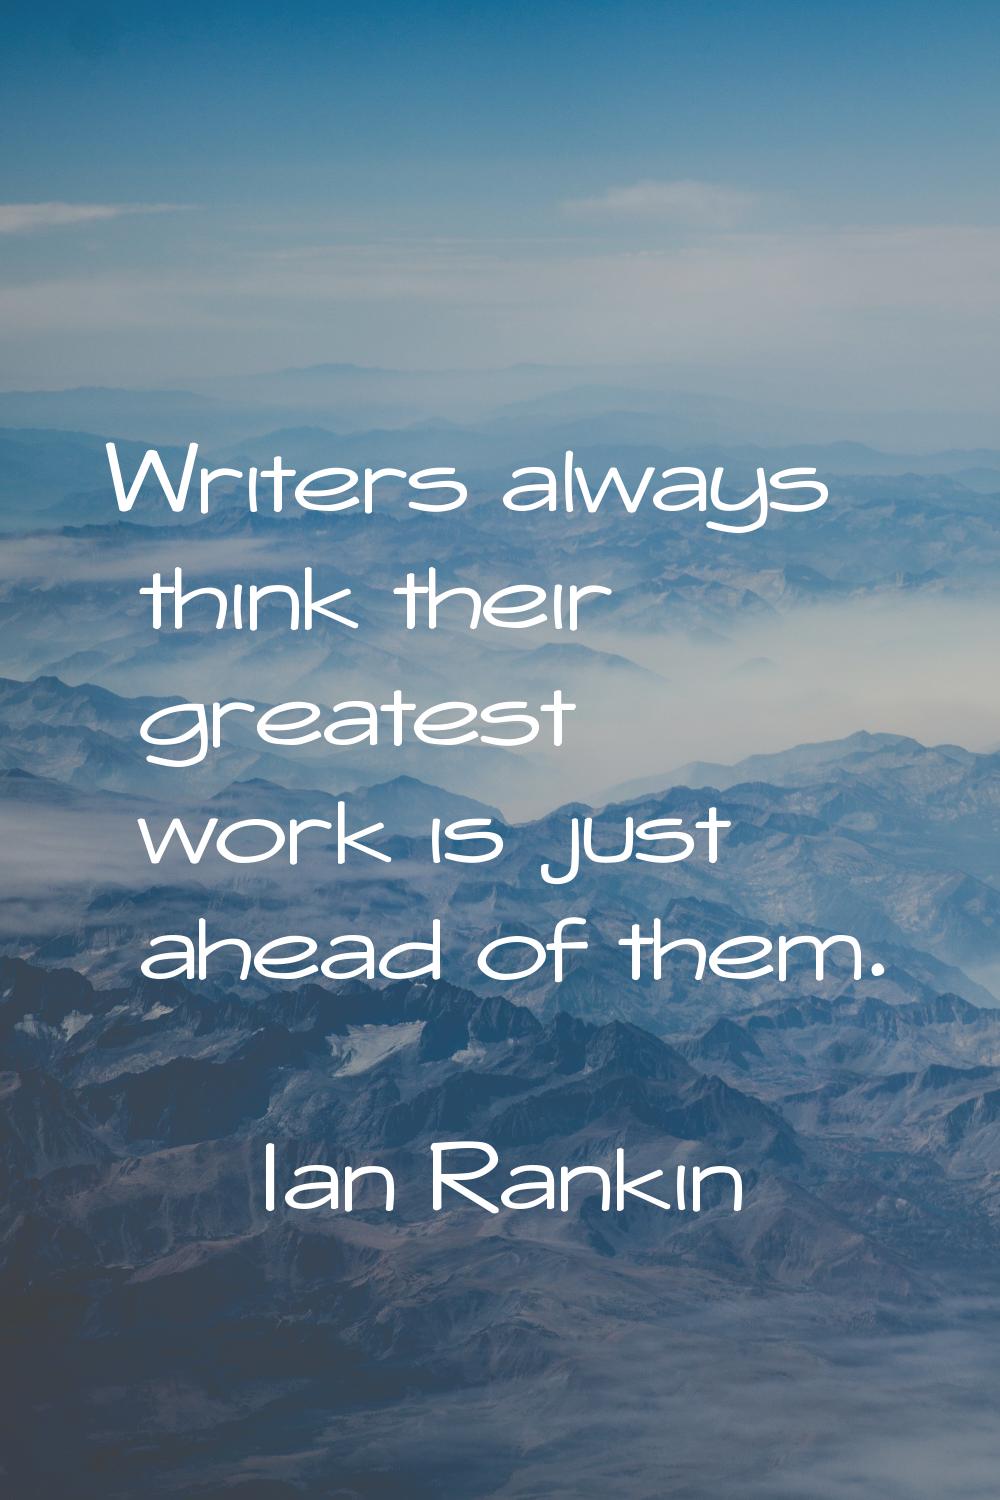 Writers always think their greatest work is just ahead of them.